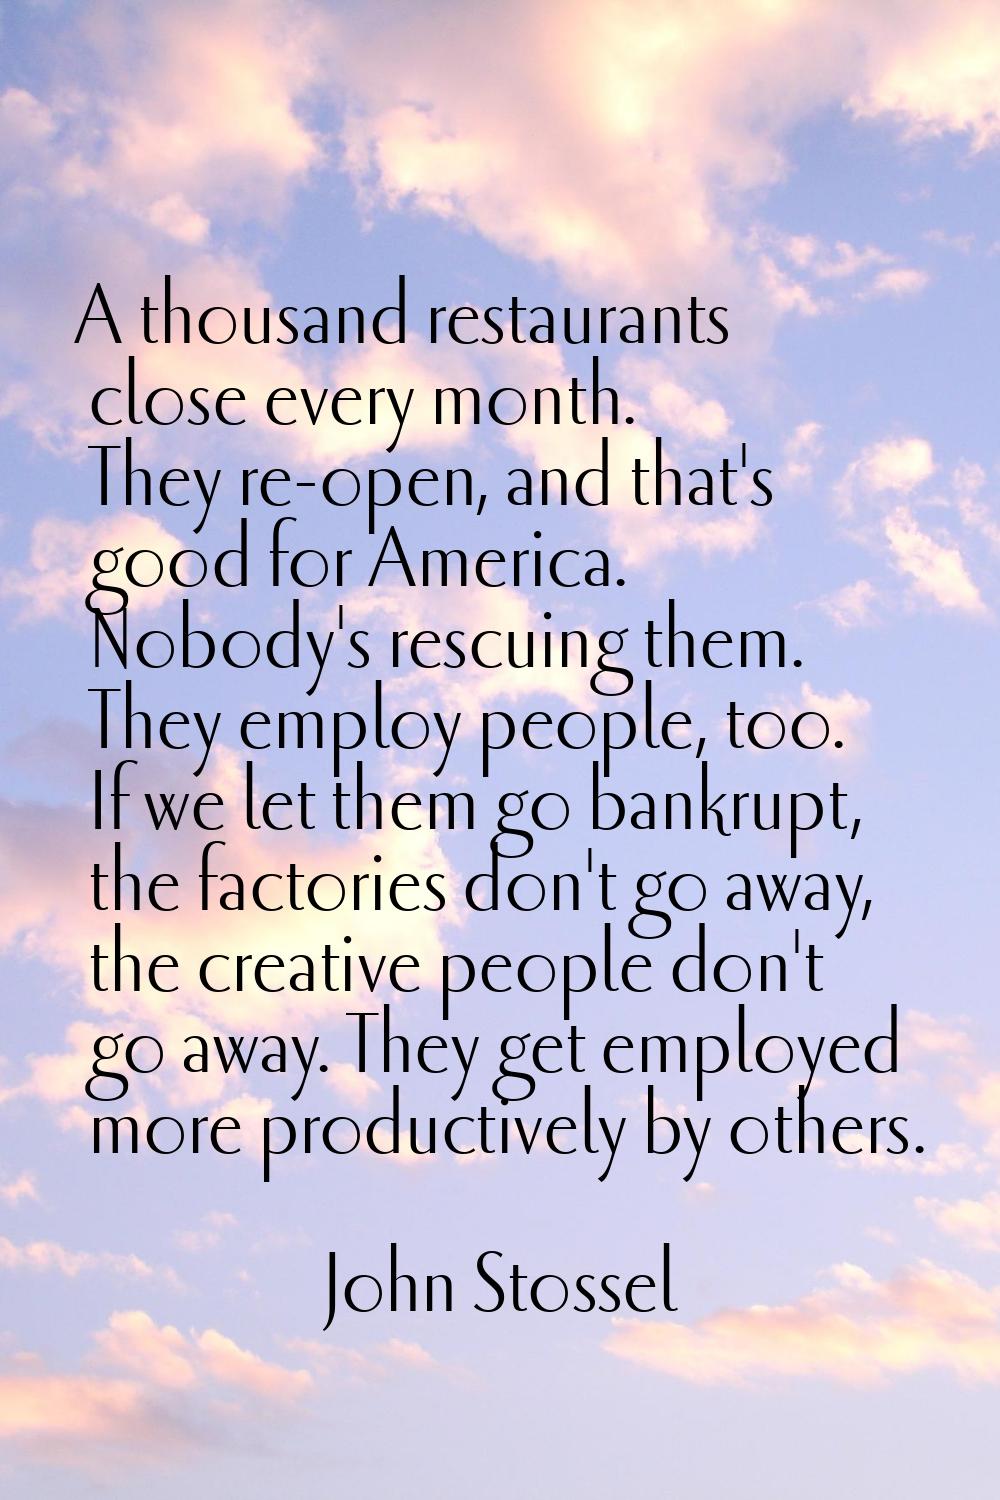 A thousand restaurants close every month. They re-open, and that's good for America. Nobody's rescu